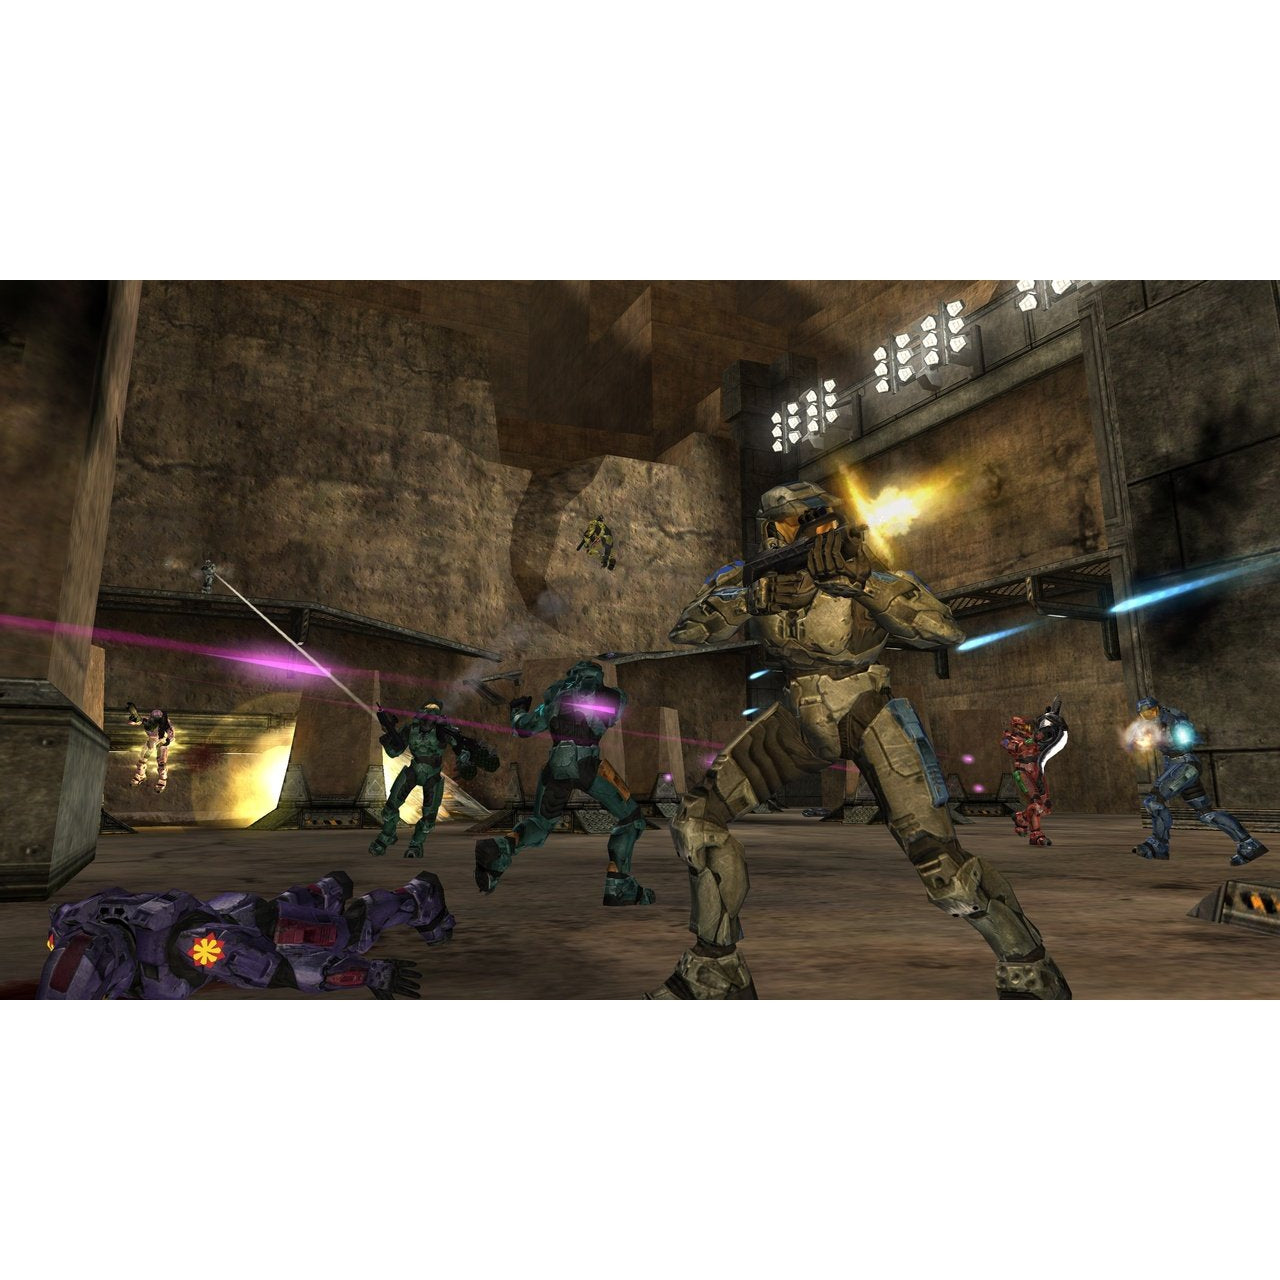 Halo 2 (Limited Collector's Edition) - Microsoft Xbox Game Complete - YourGamingShop.com - Buy, Sell, Trade Video Games Online. 120 Day Warranty. Satisfaction Guaranteed.